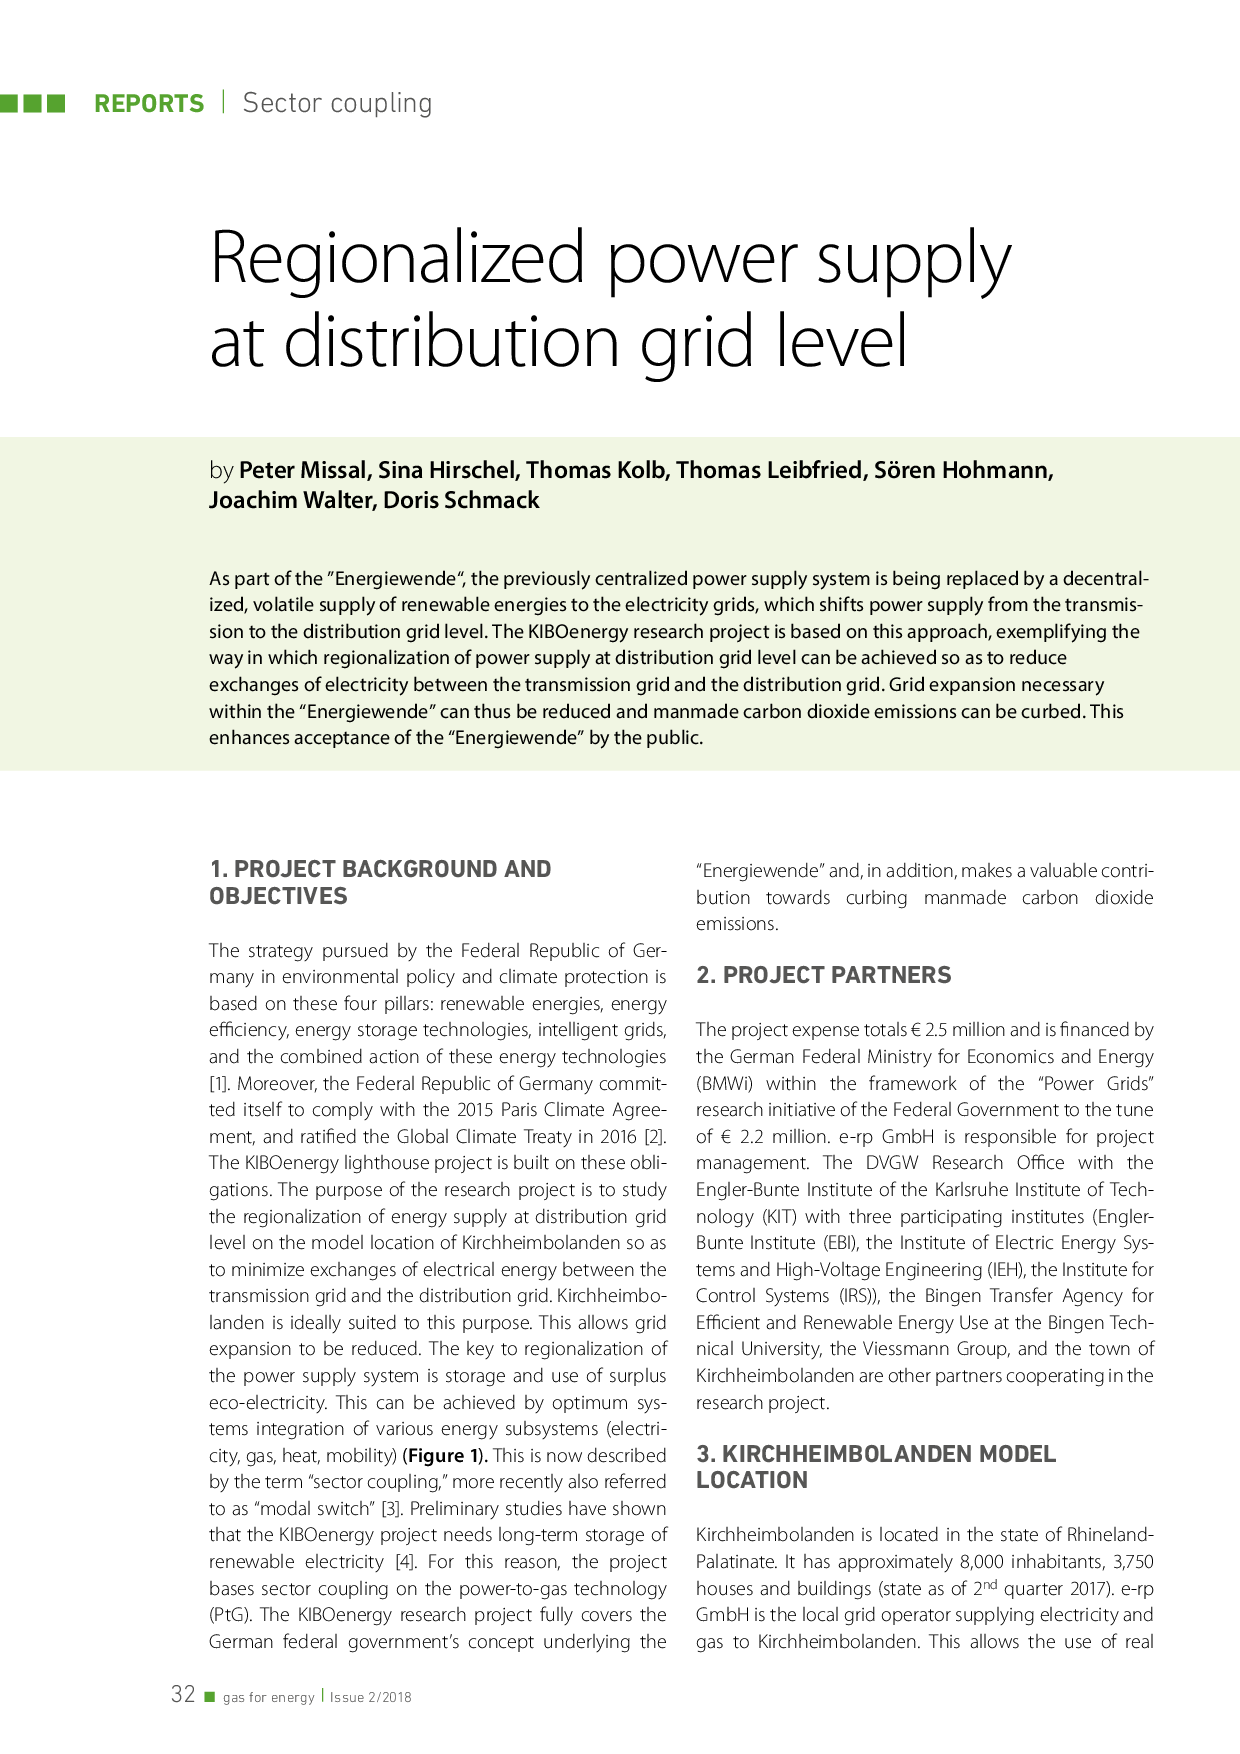 Regionalized power supply at distribution grid level